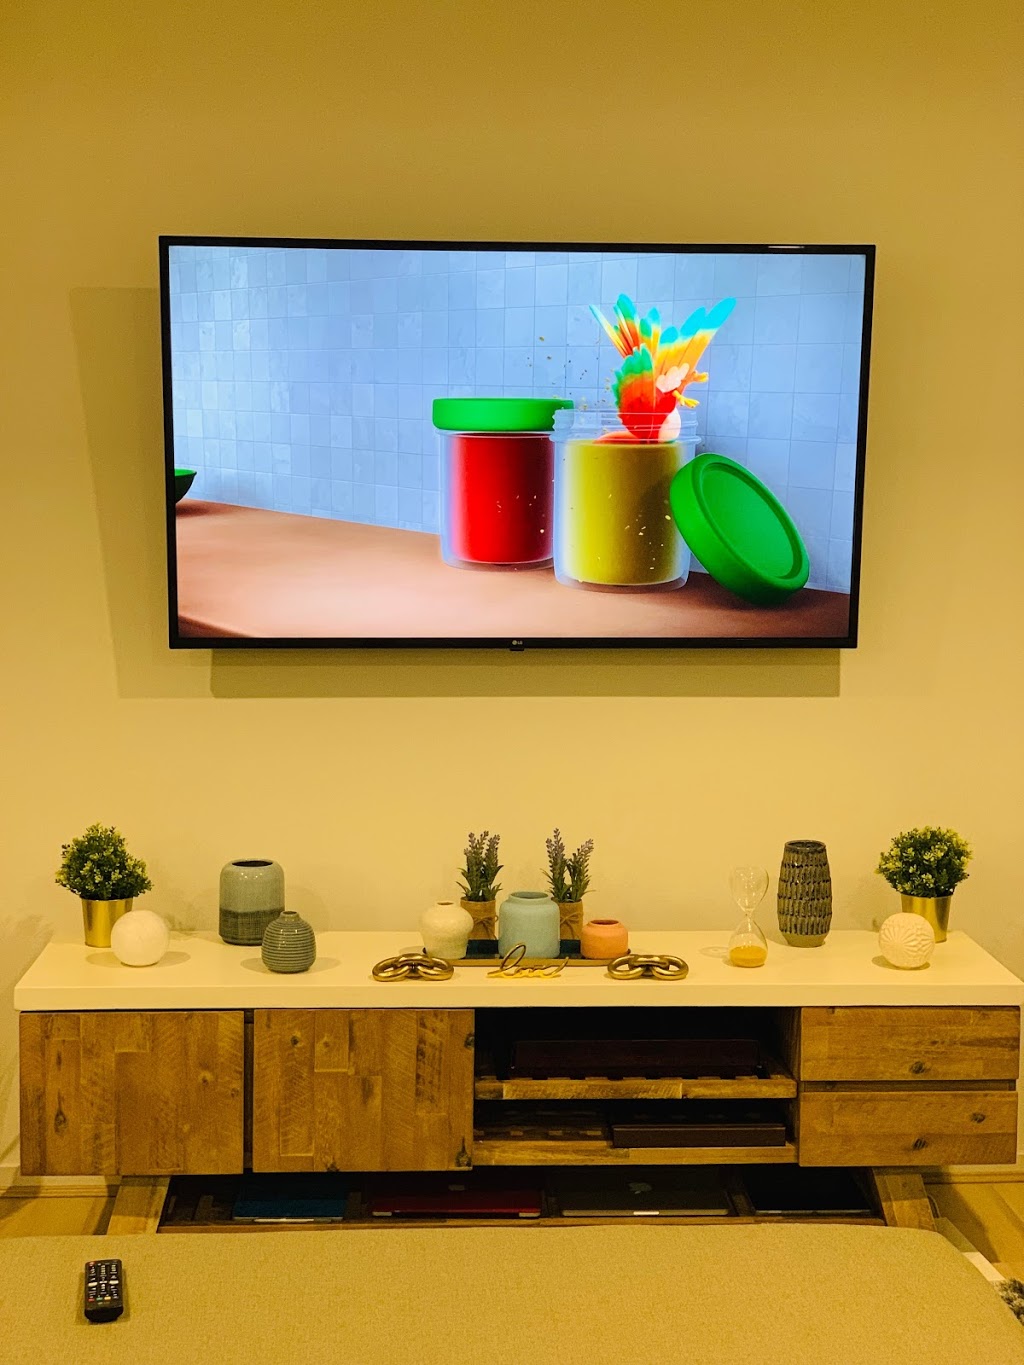 Melbourne TV Wall Mounting - TV Installers Melbourne/TV Installa | Ford St, Ivanhoe VIC 3079, Australia | Phone: 0433 642 455